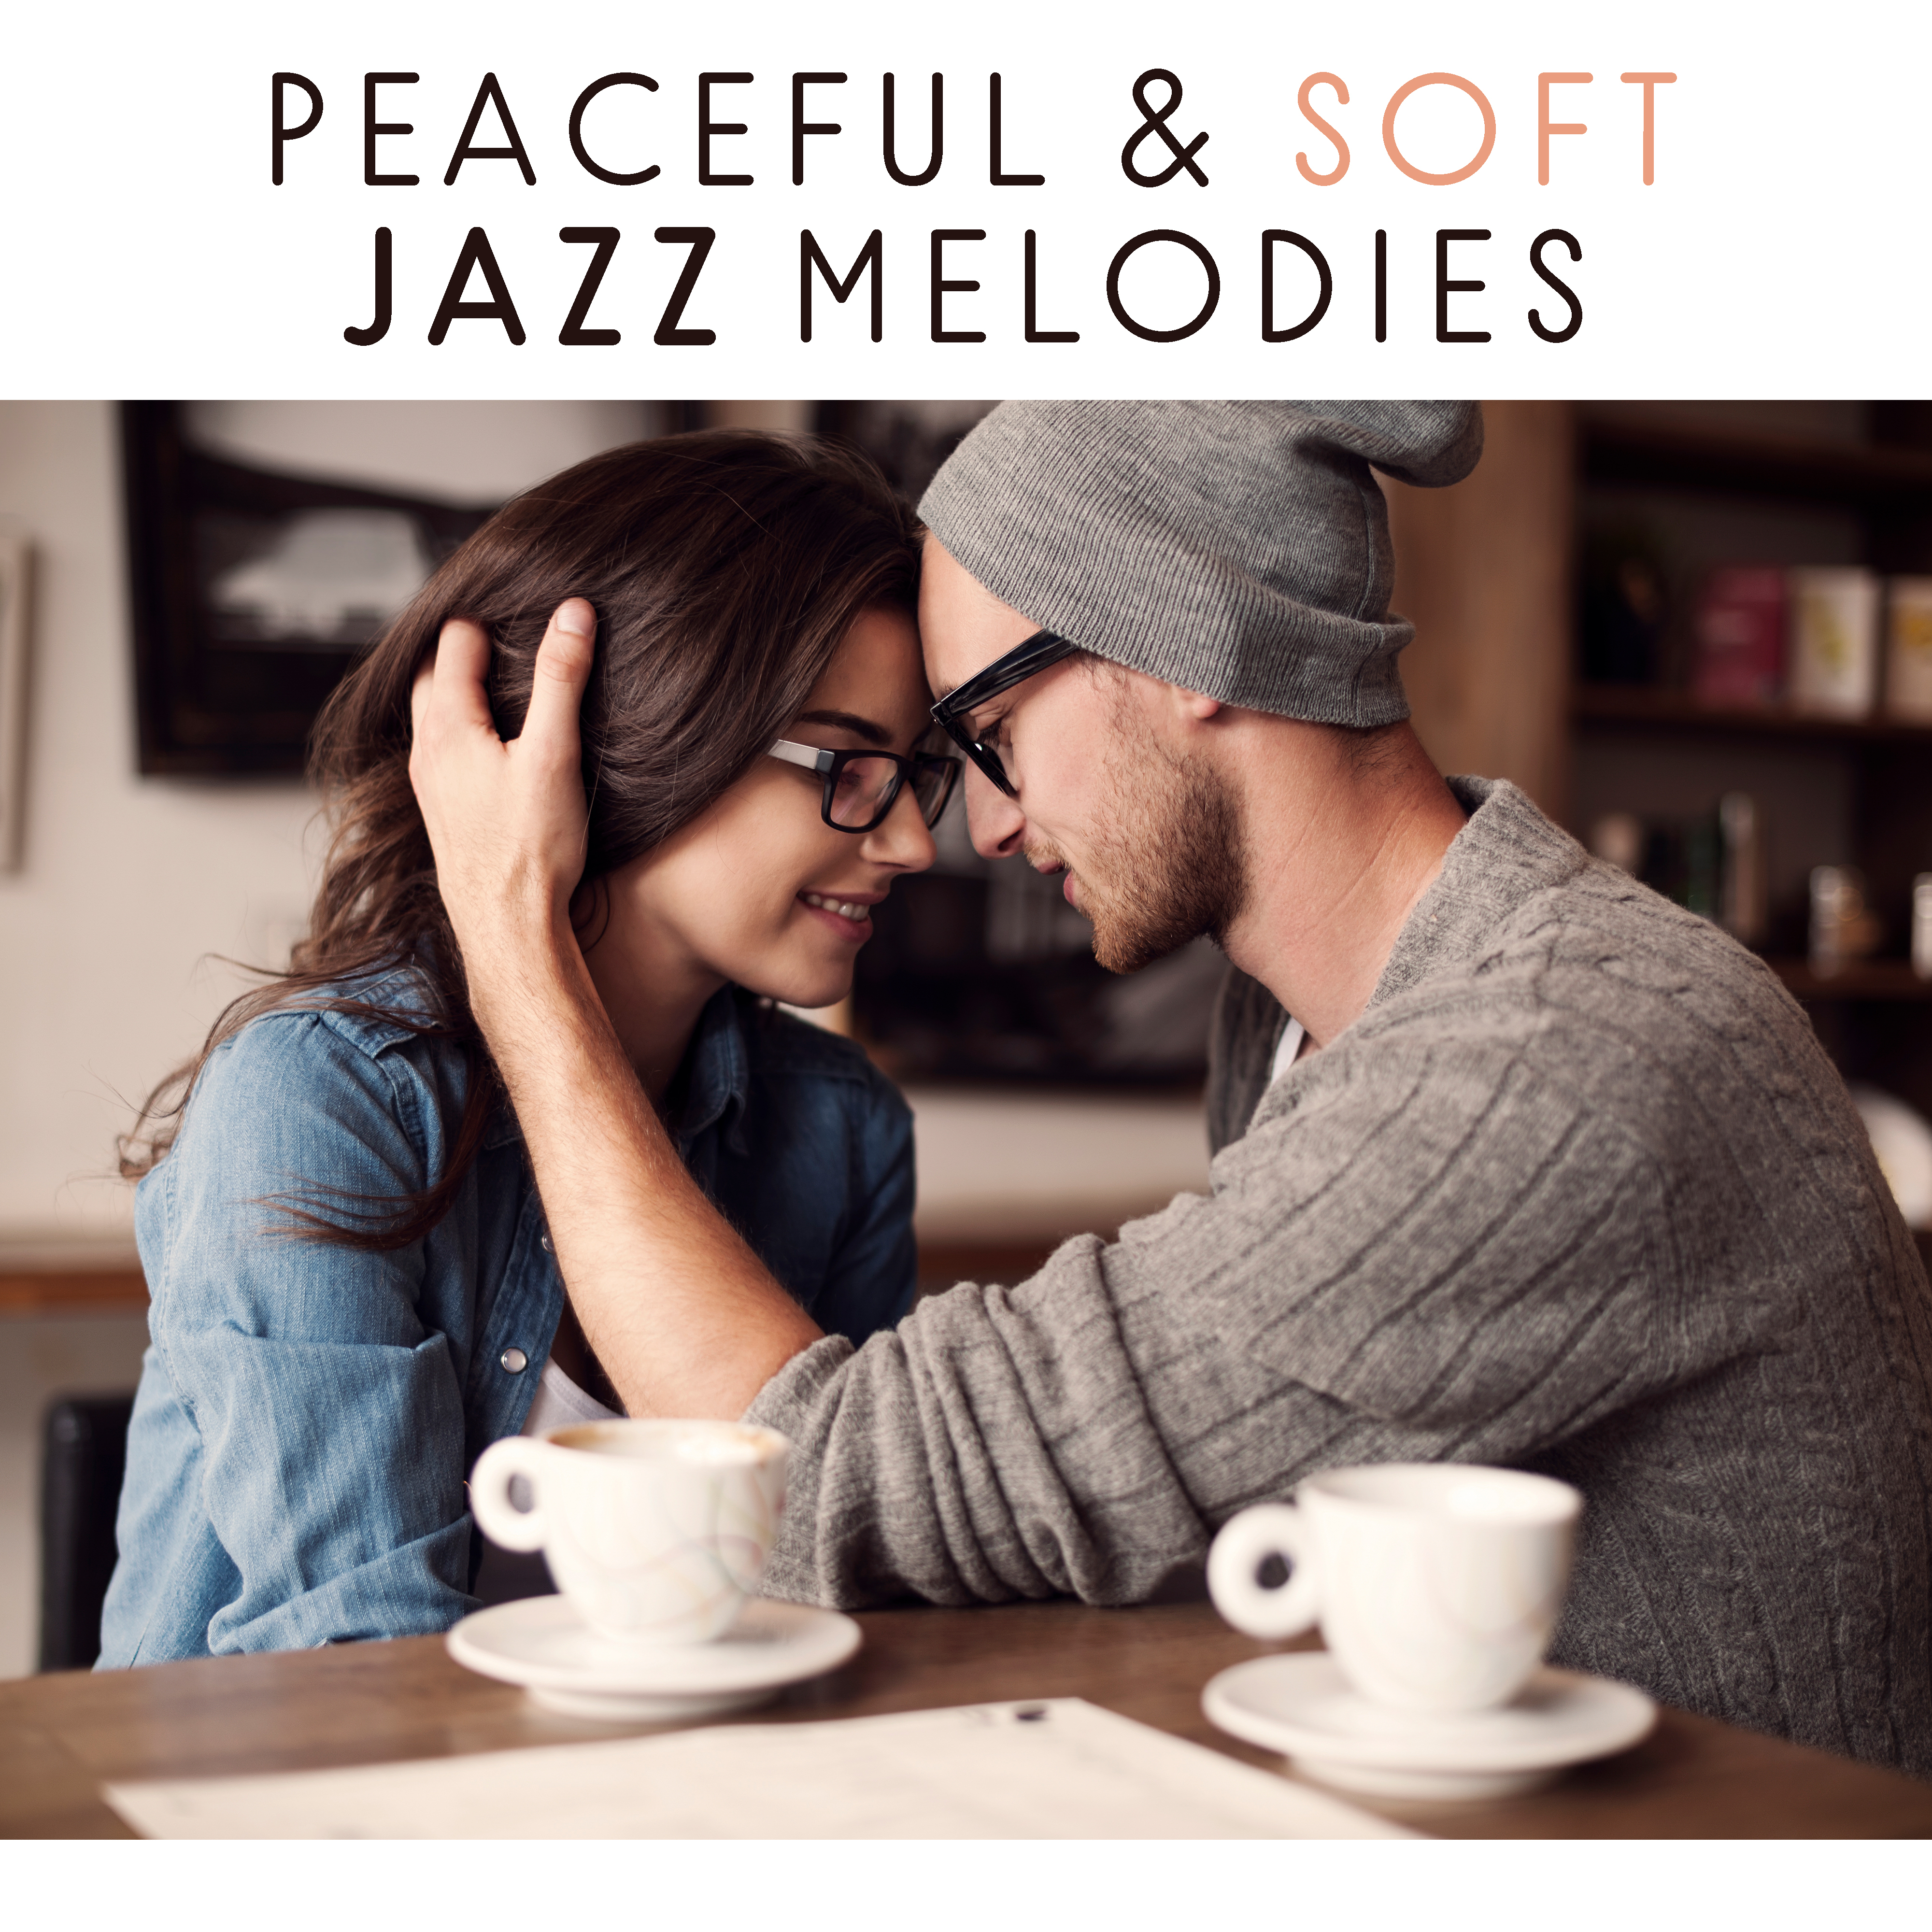 Peaceful & Soft Jazz Melodies